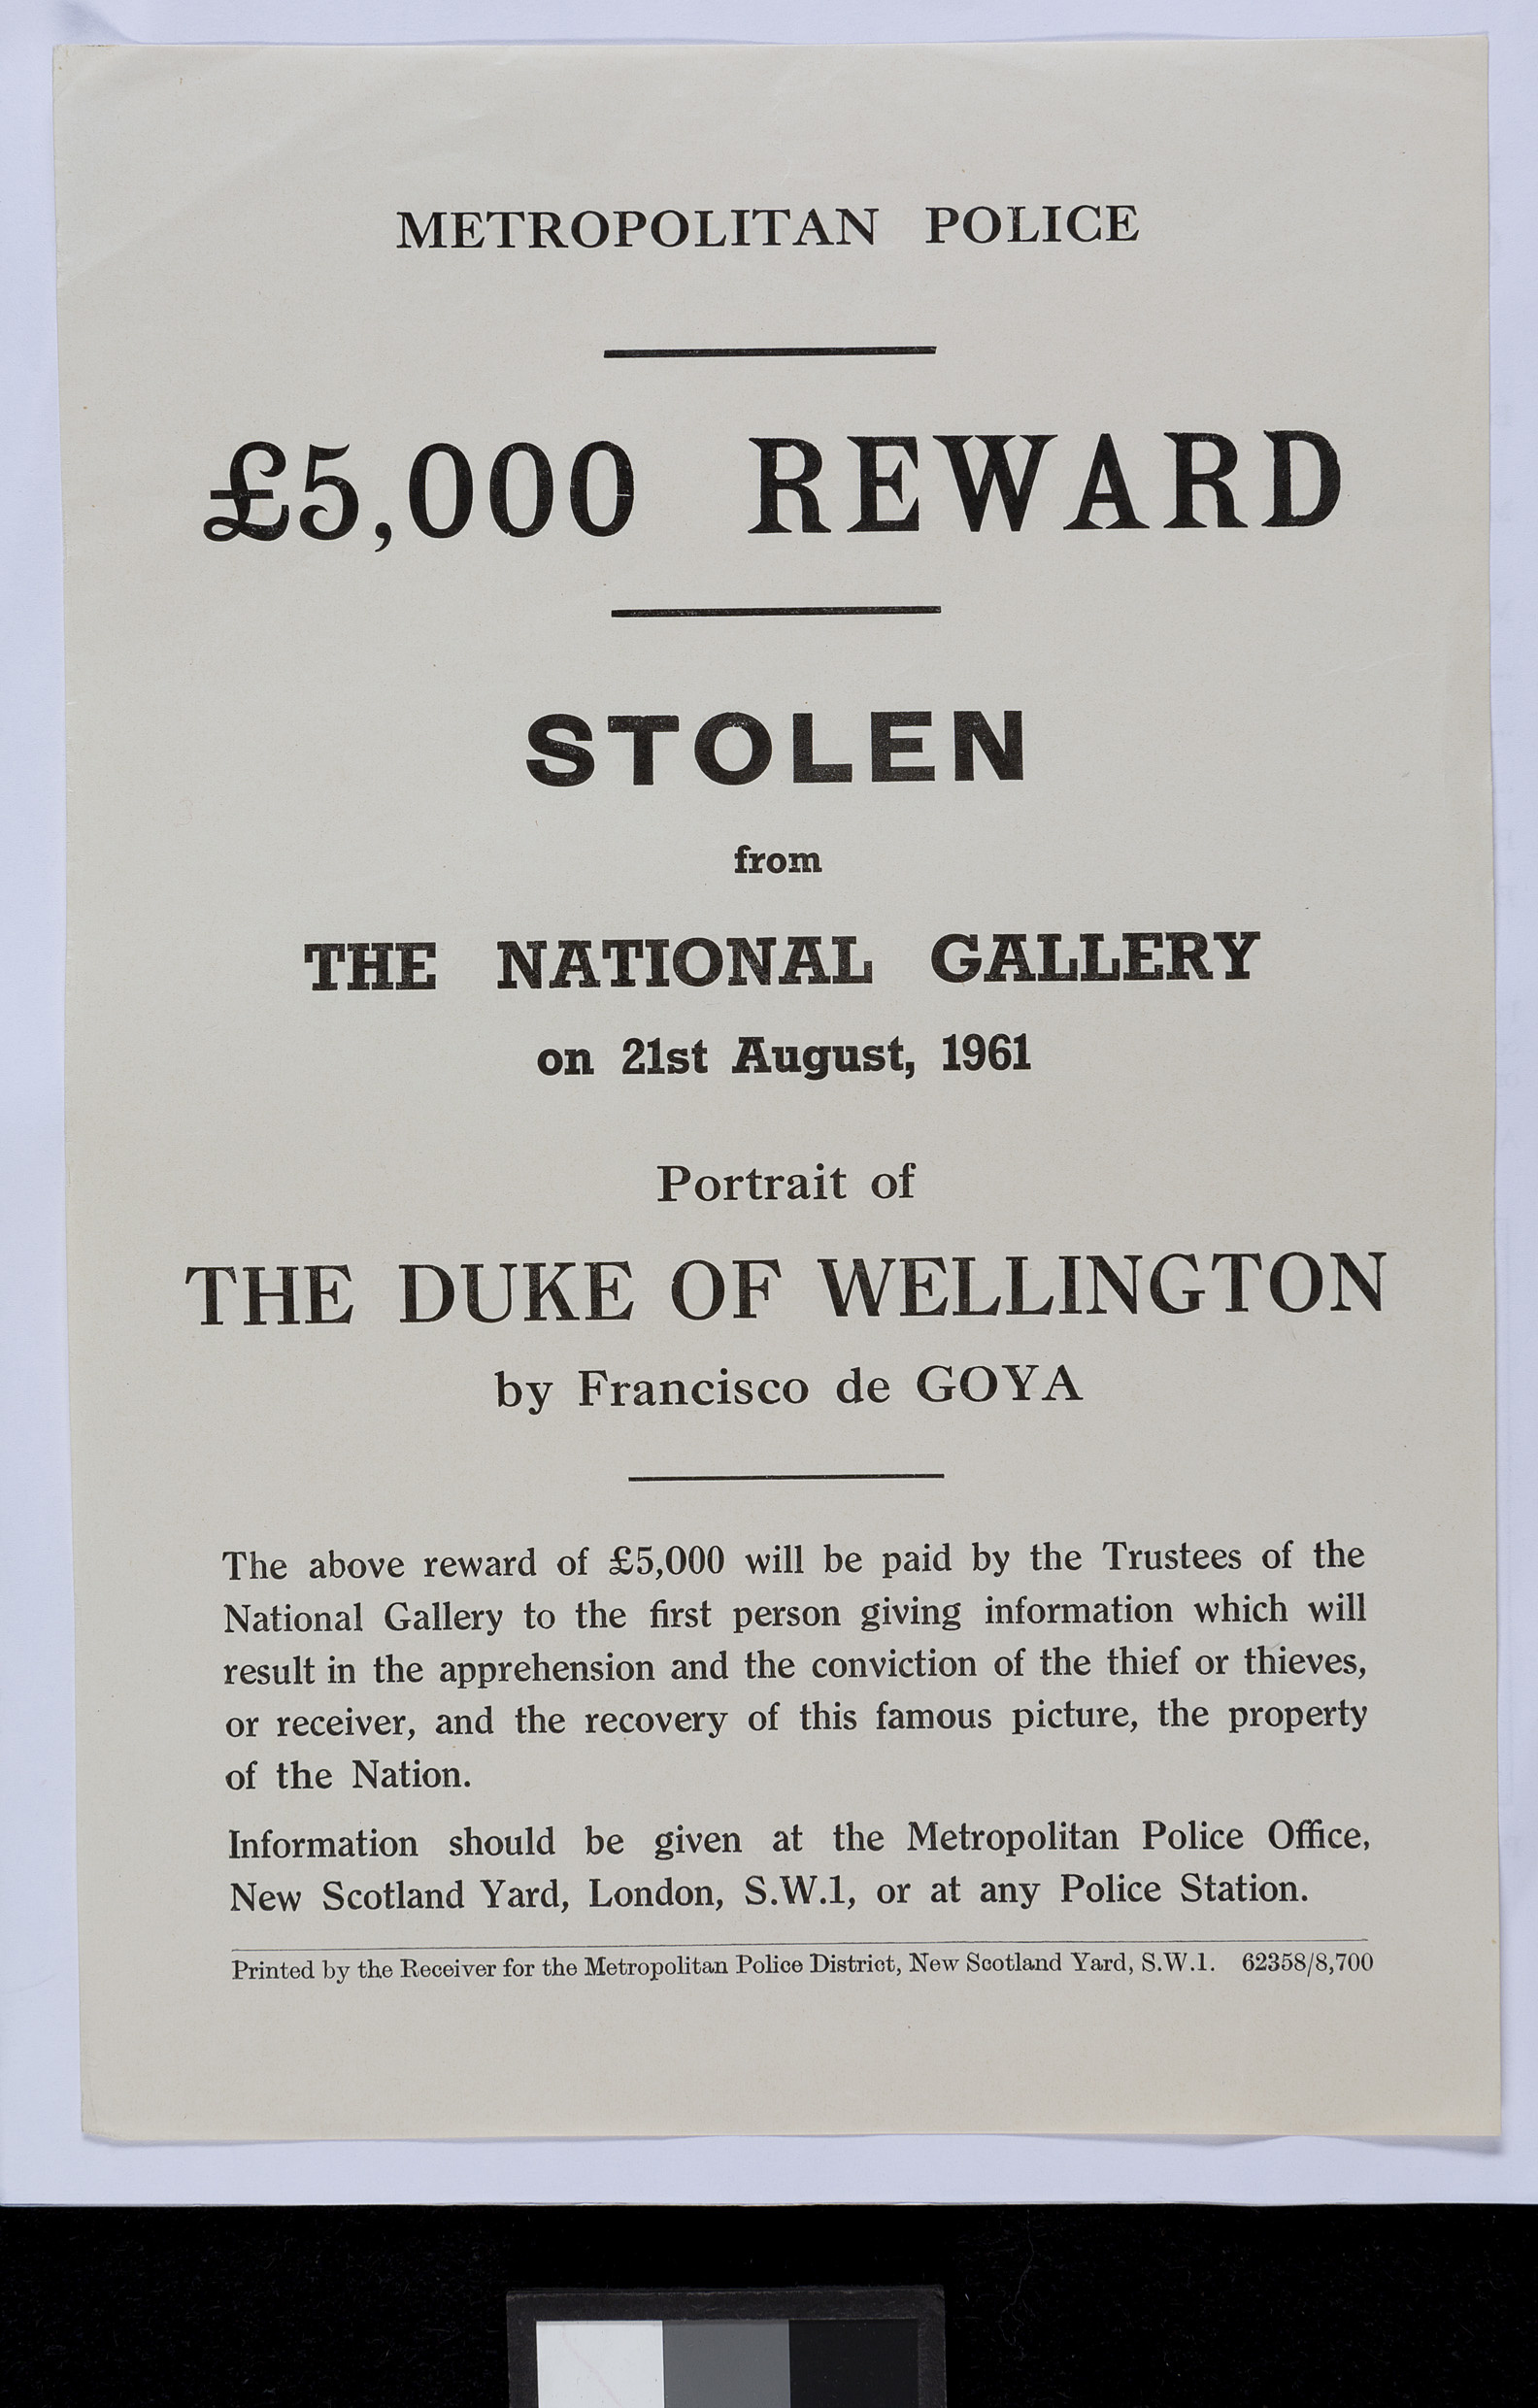 Archival Record relating to the theft of Goya's 'Portrait of the